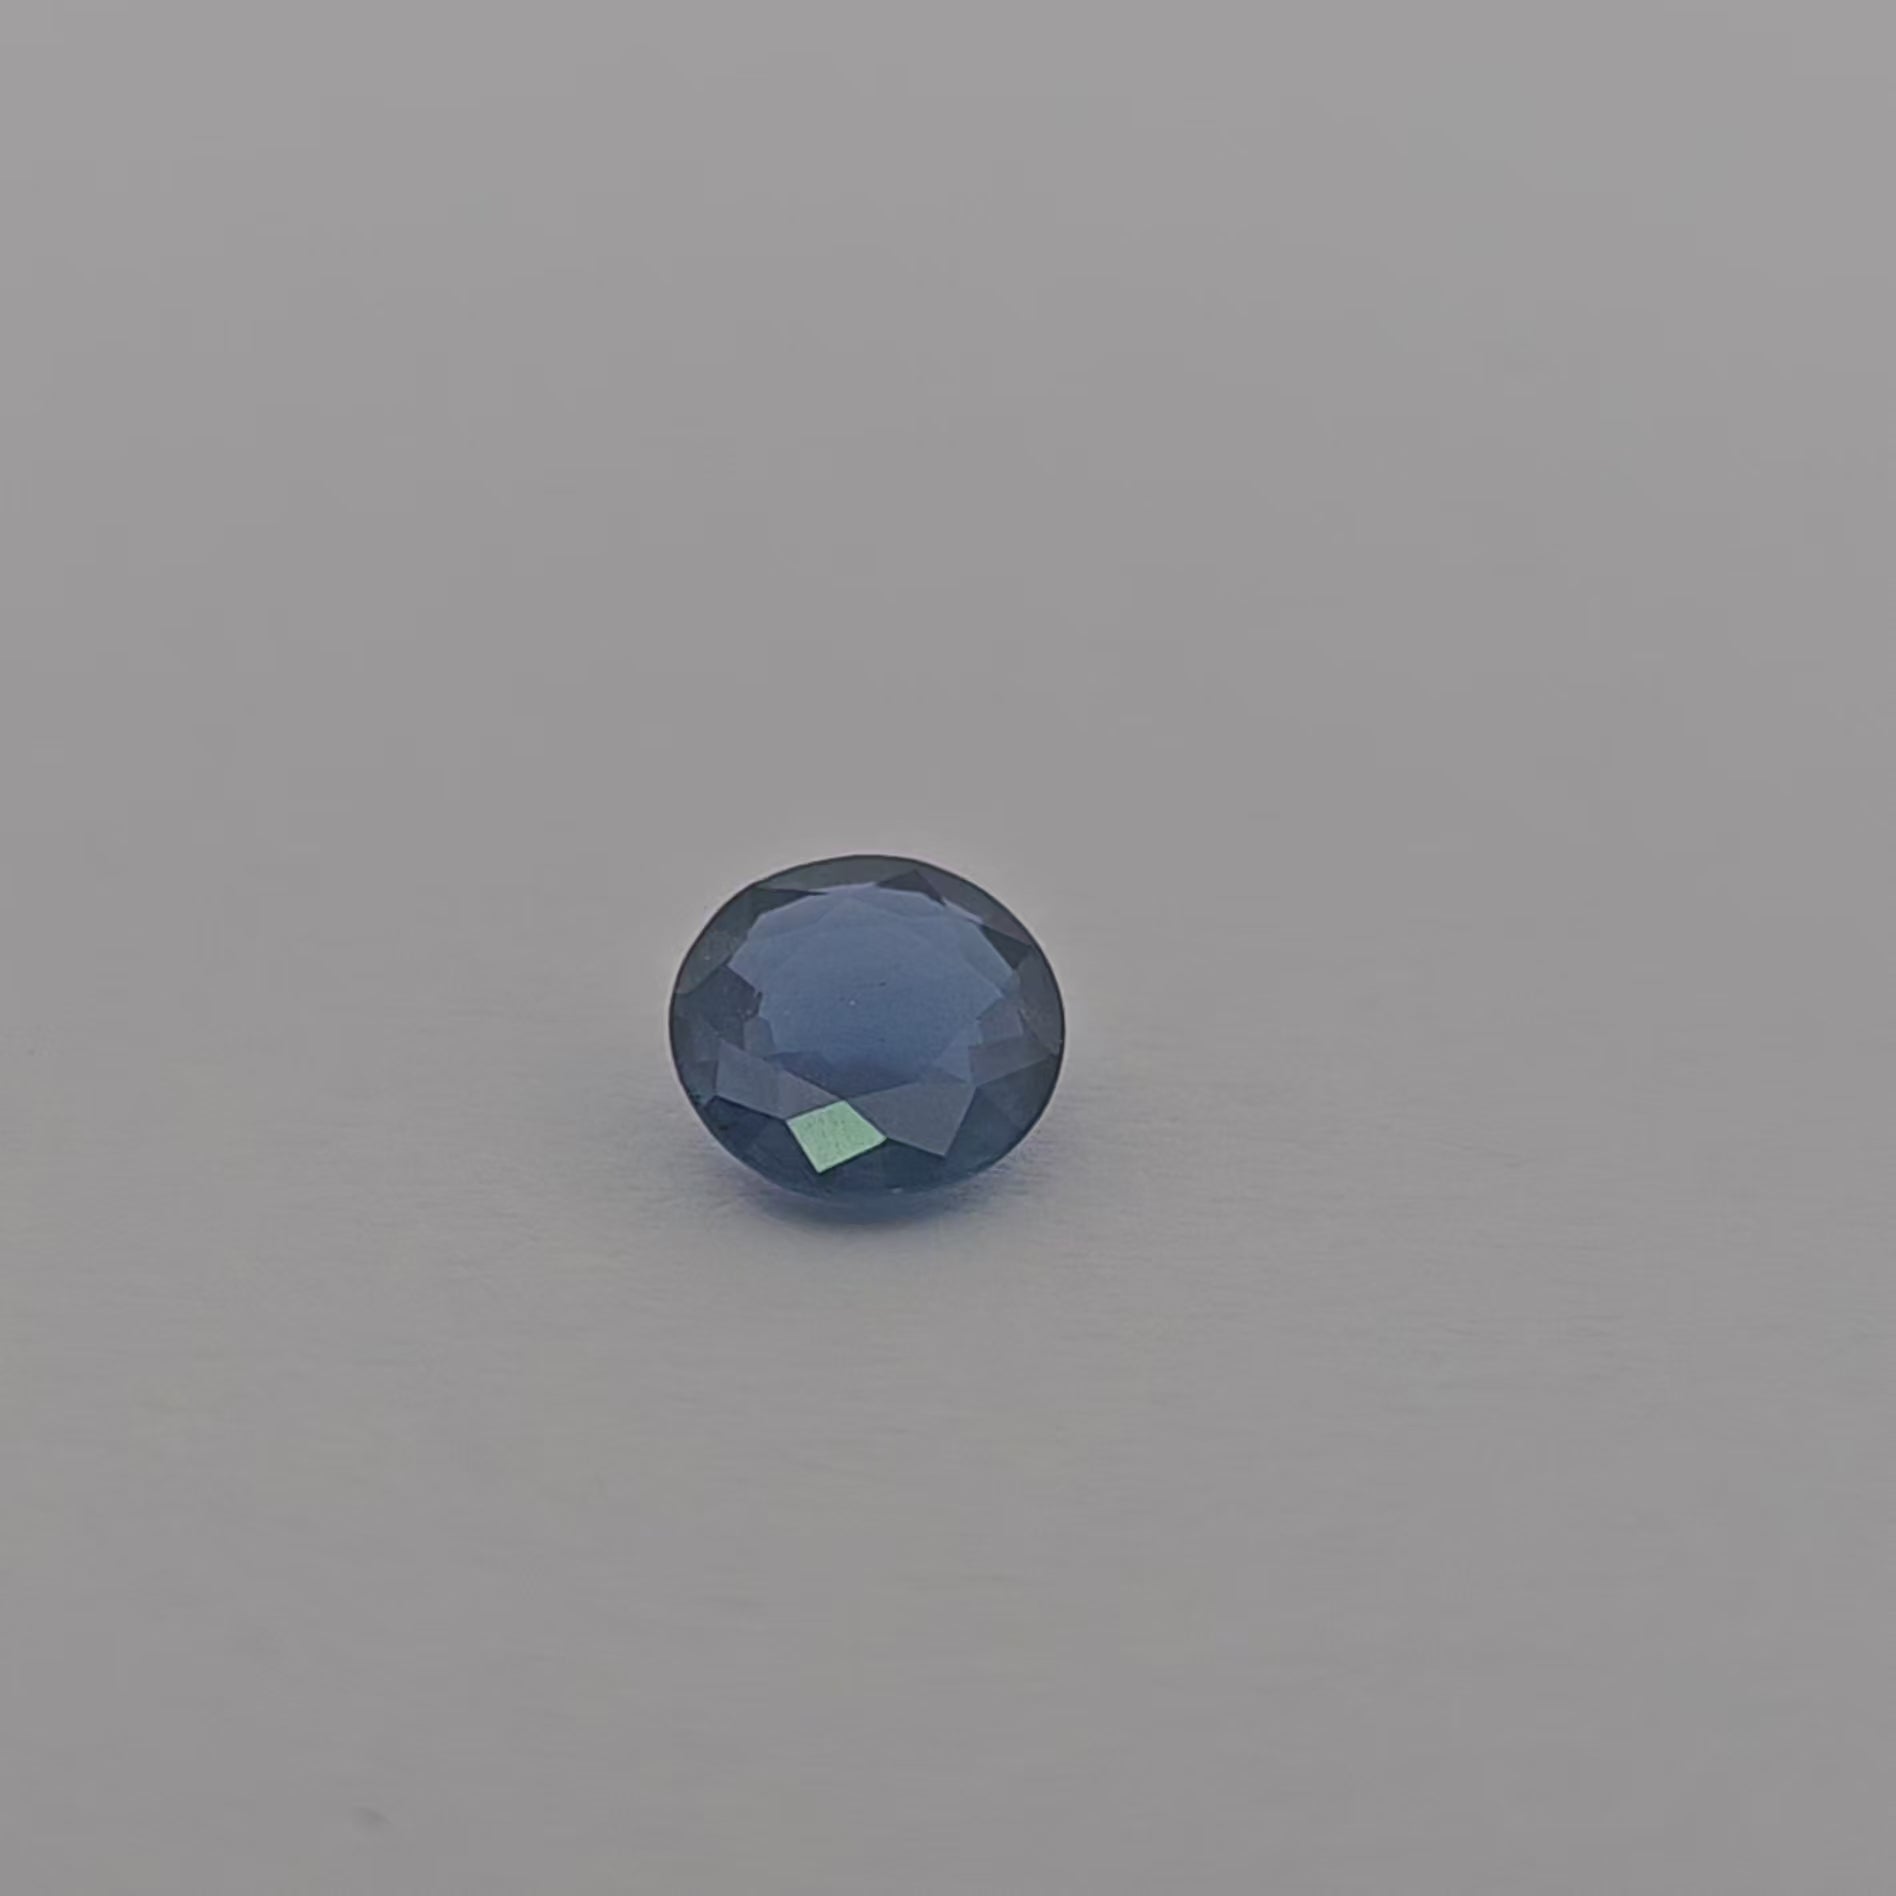 Natural Blue Sapphire Stone 0.95 Carats Round Shape 6.2 mm